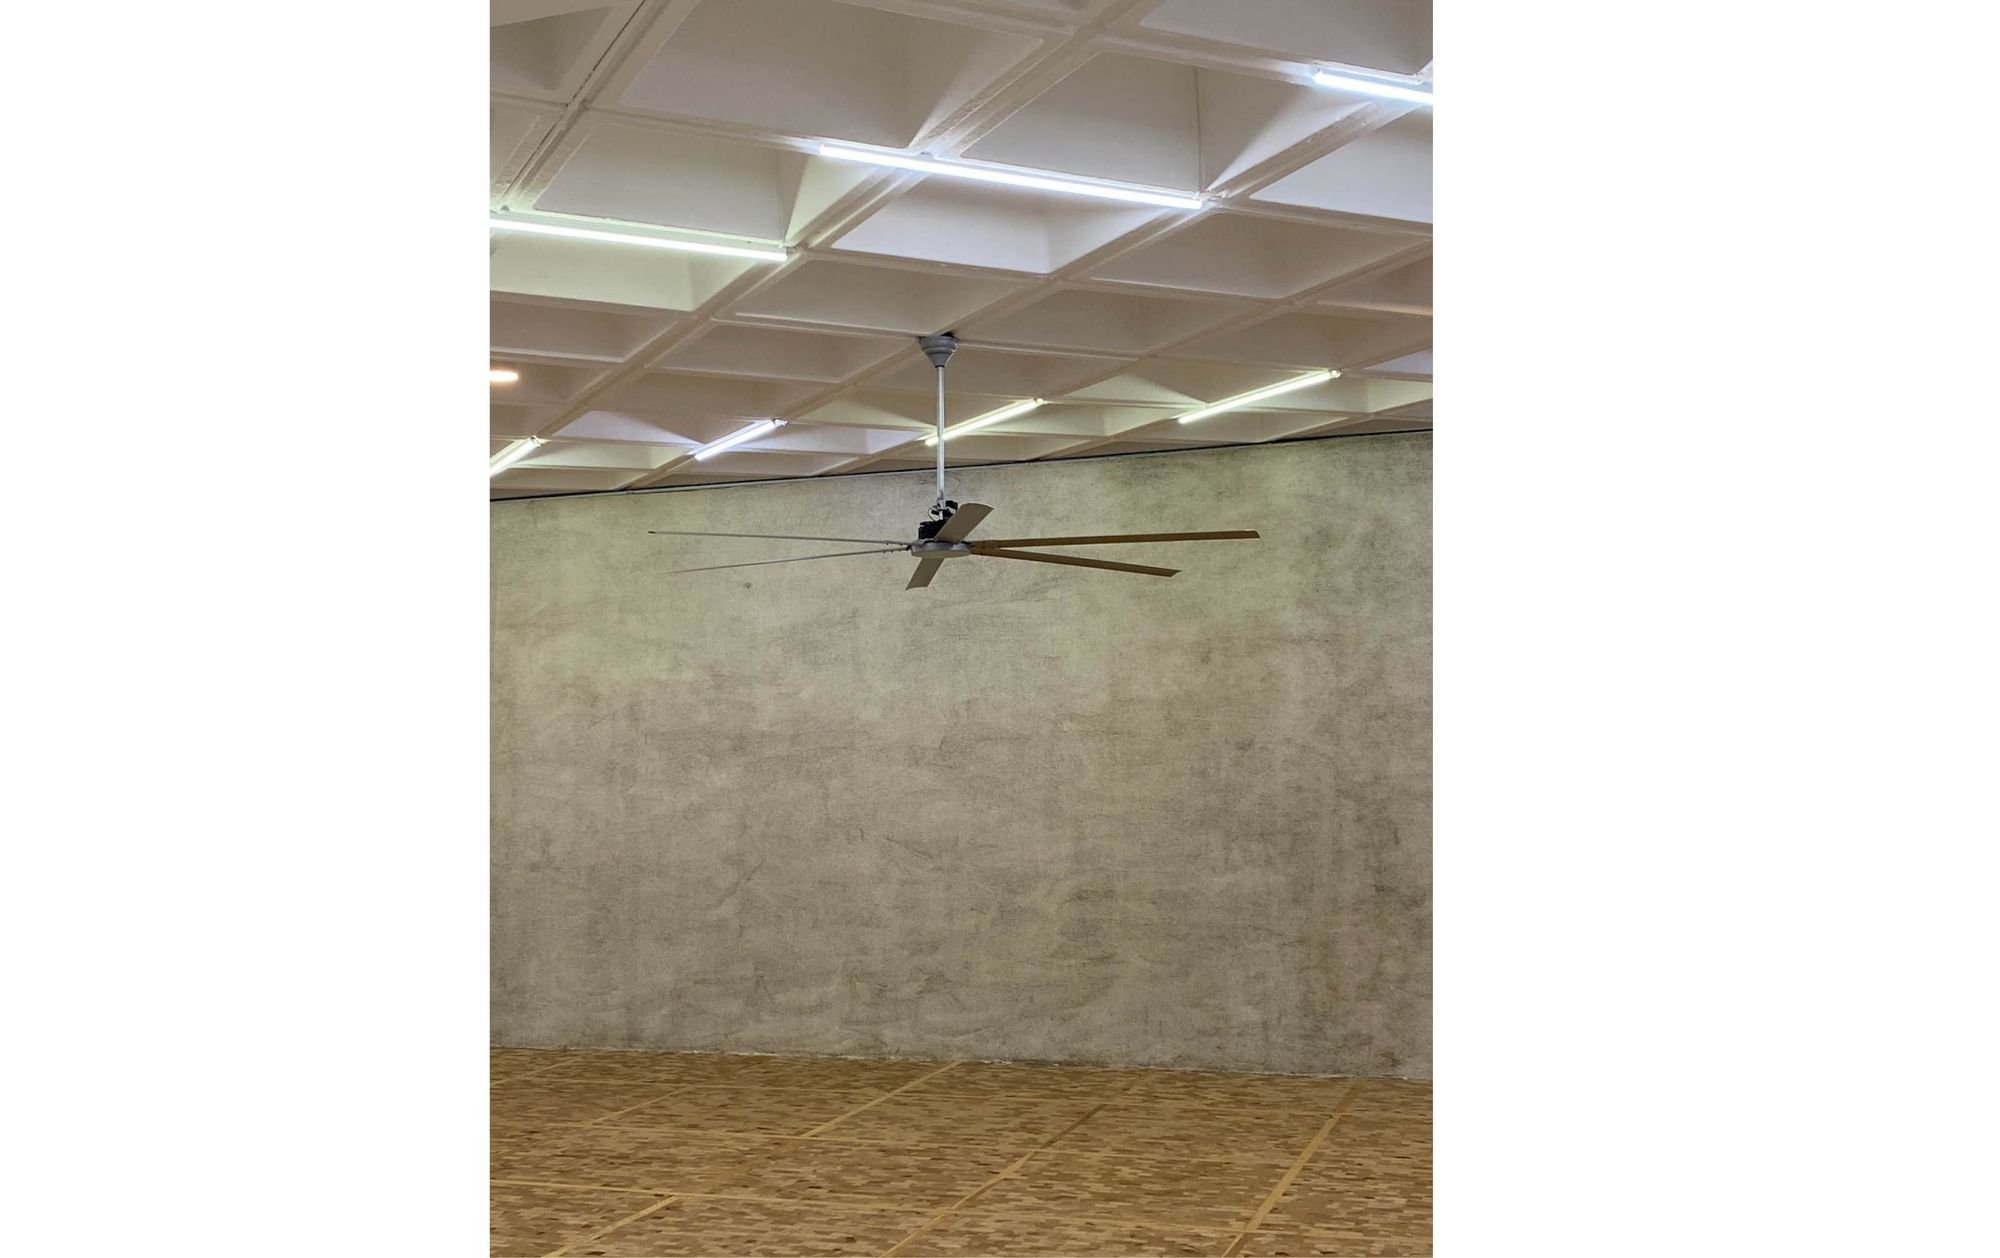 In a stark exhibition space with wooden floors and concrete walls and ceiling, a ceiling fan drops down in the center of the image, seemingly still. 